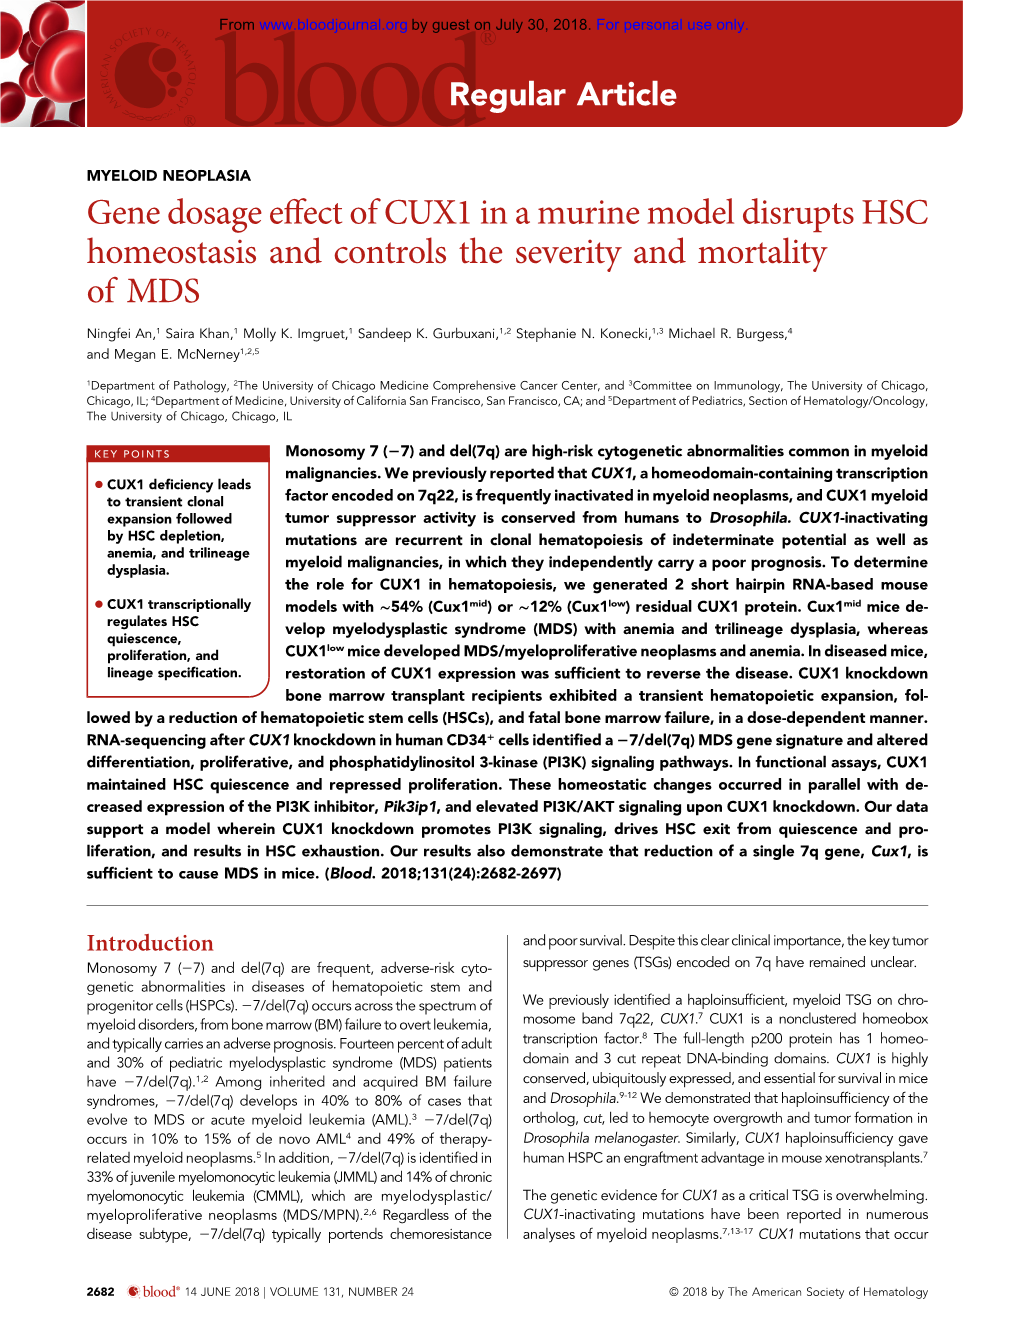 Gene Dosage Effect of CUX1 in a Murine Model Disrupts HSC Homeostasis and Controls the Severity and Mortality of MDS